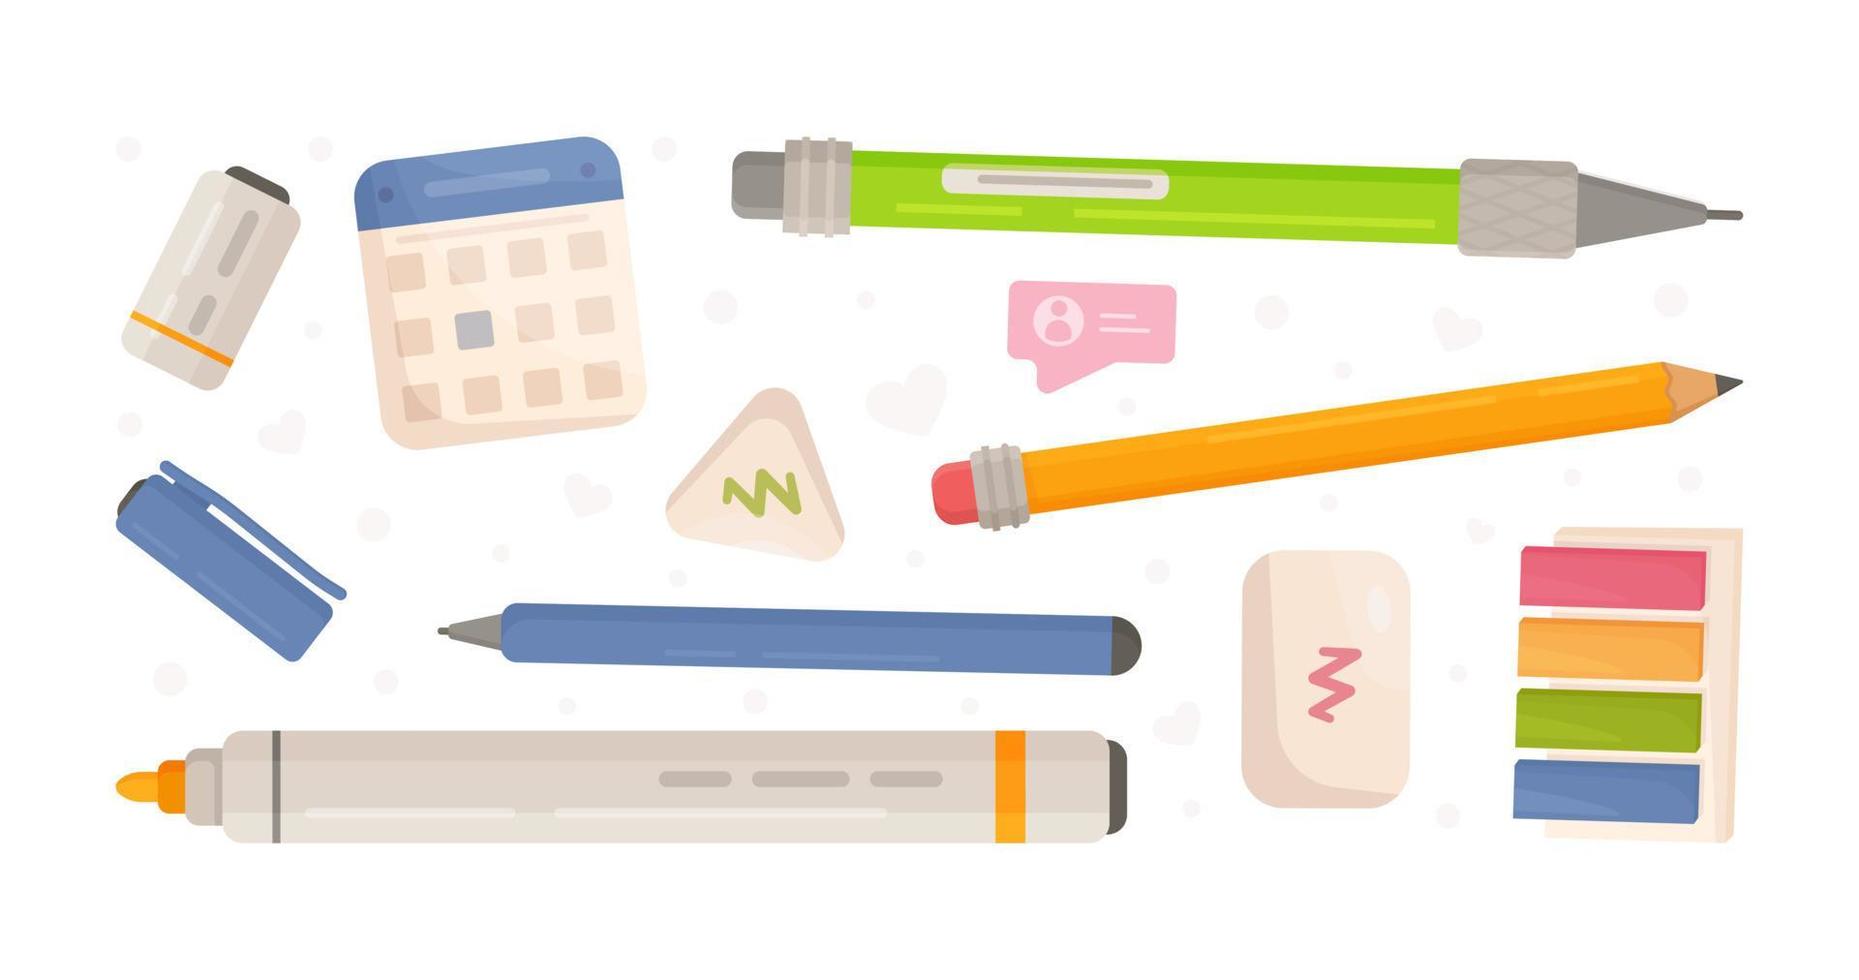 Set of various stationery products. Vector illustration of office supplies on white background. Pen, pencil, marker, eraser, bookmarks, sharpener, etc.